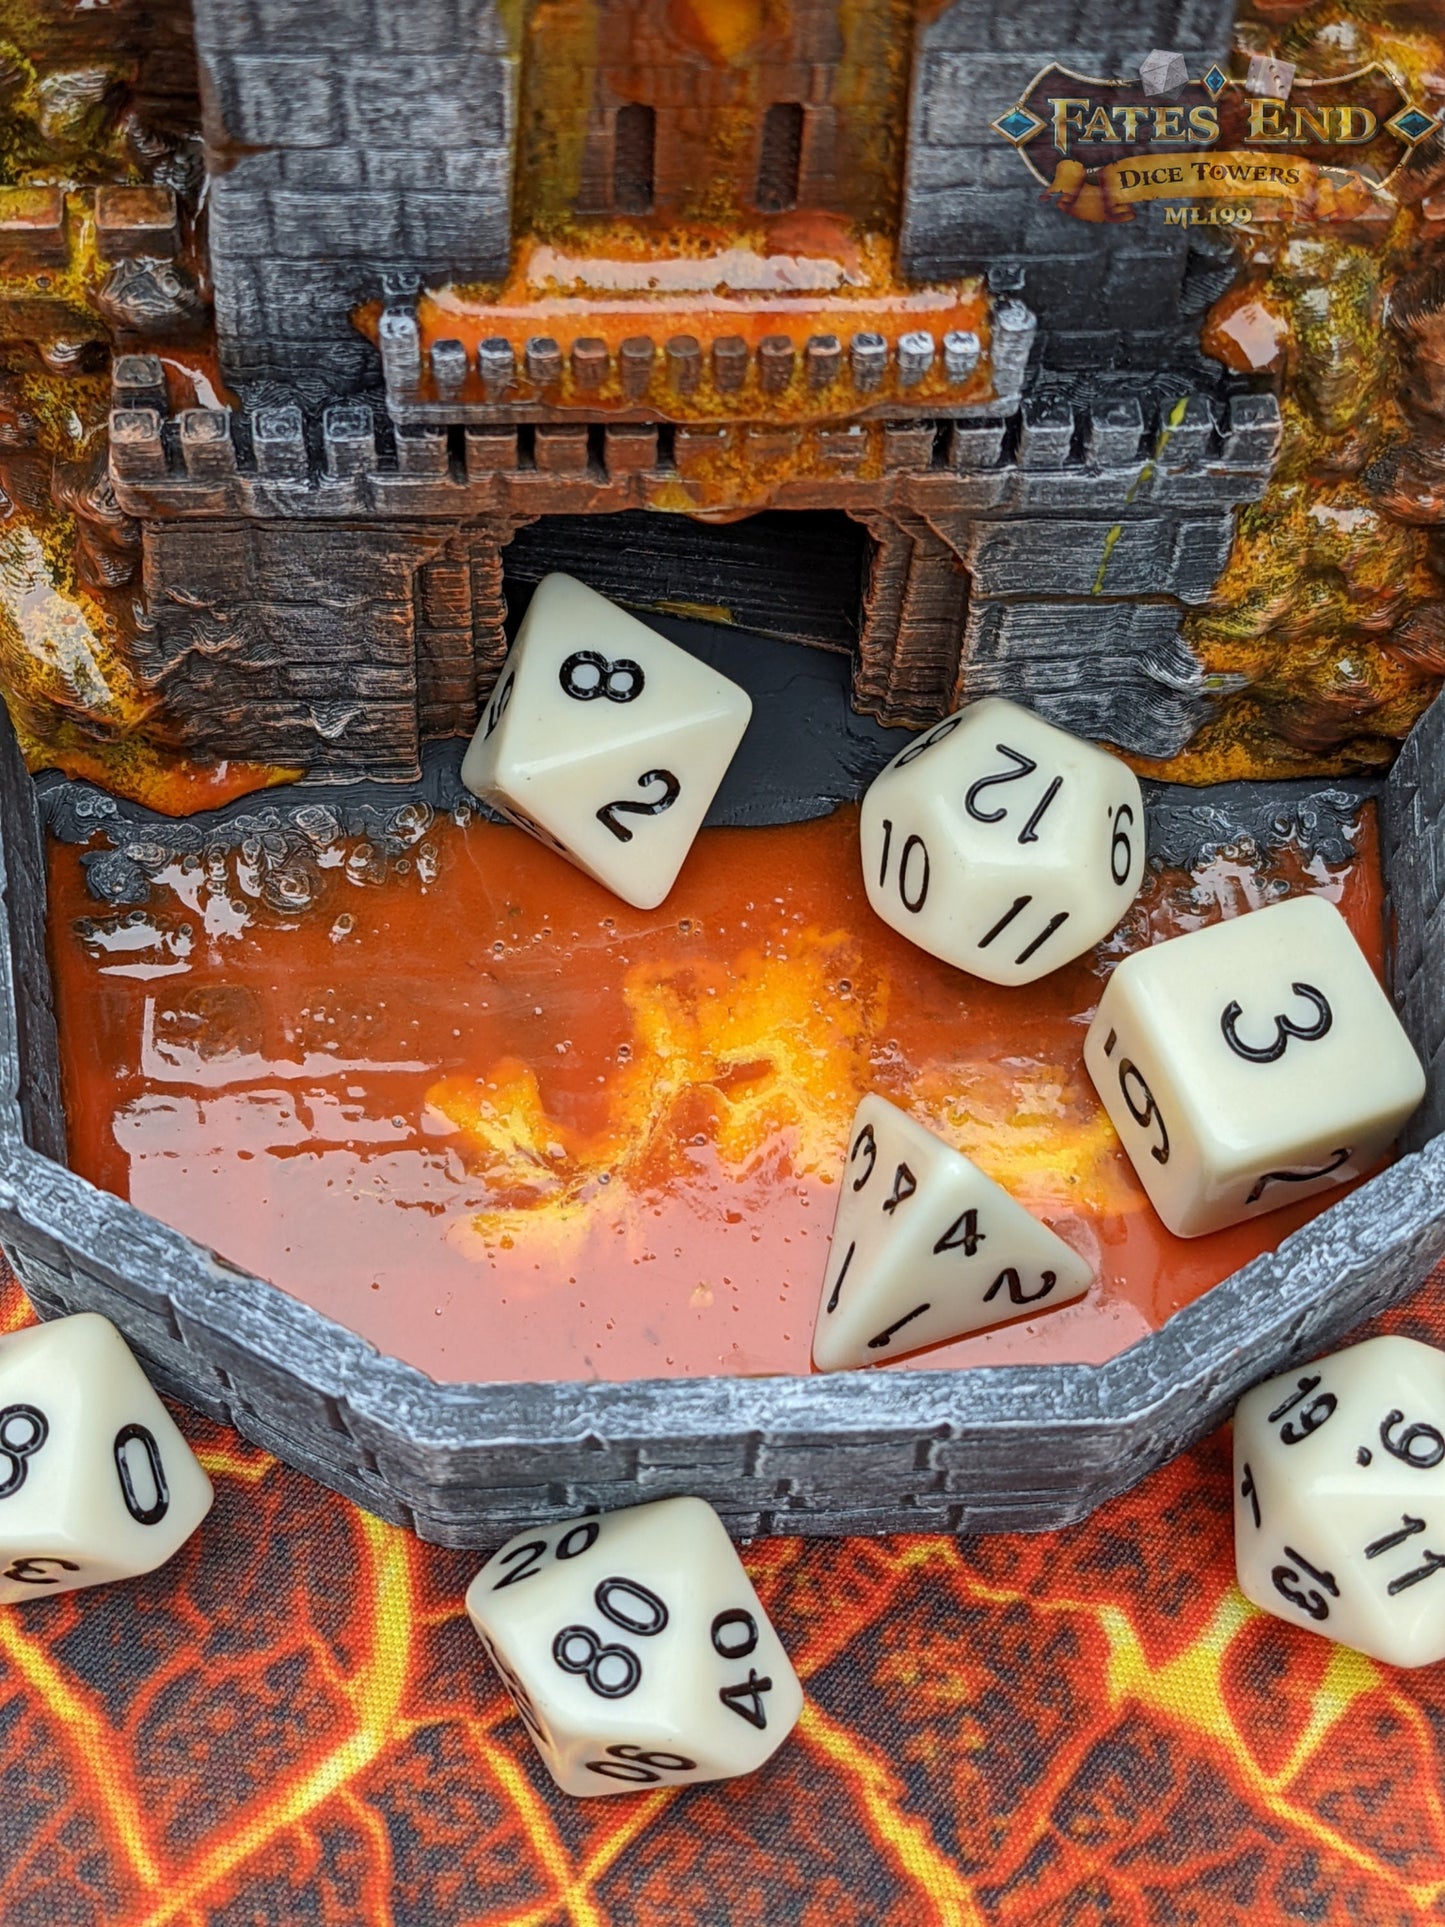 Dragonborn Dice Tower - Fate's End Collection - Channel the Fiery Soul of Dragonkind with Every Fateful Roll.